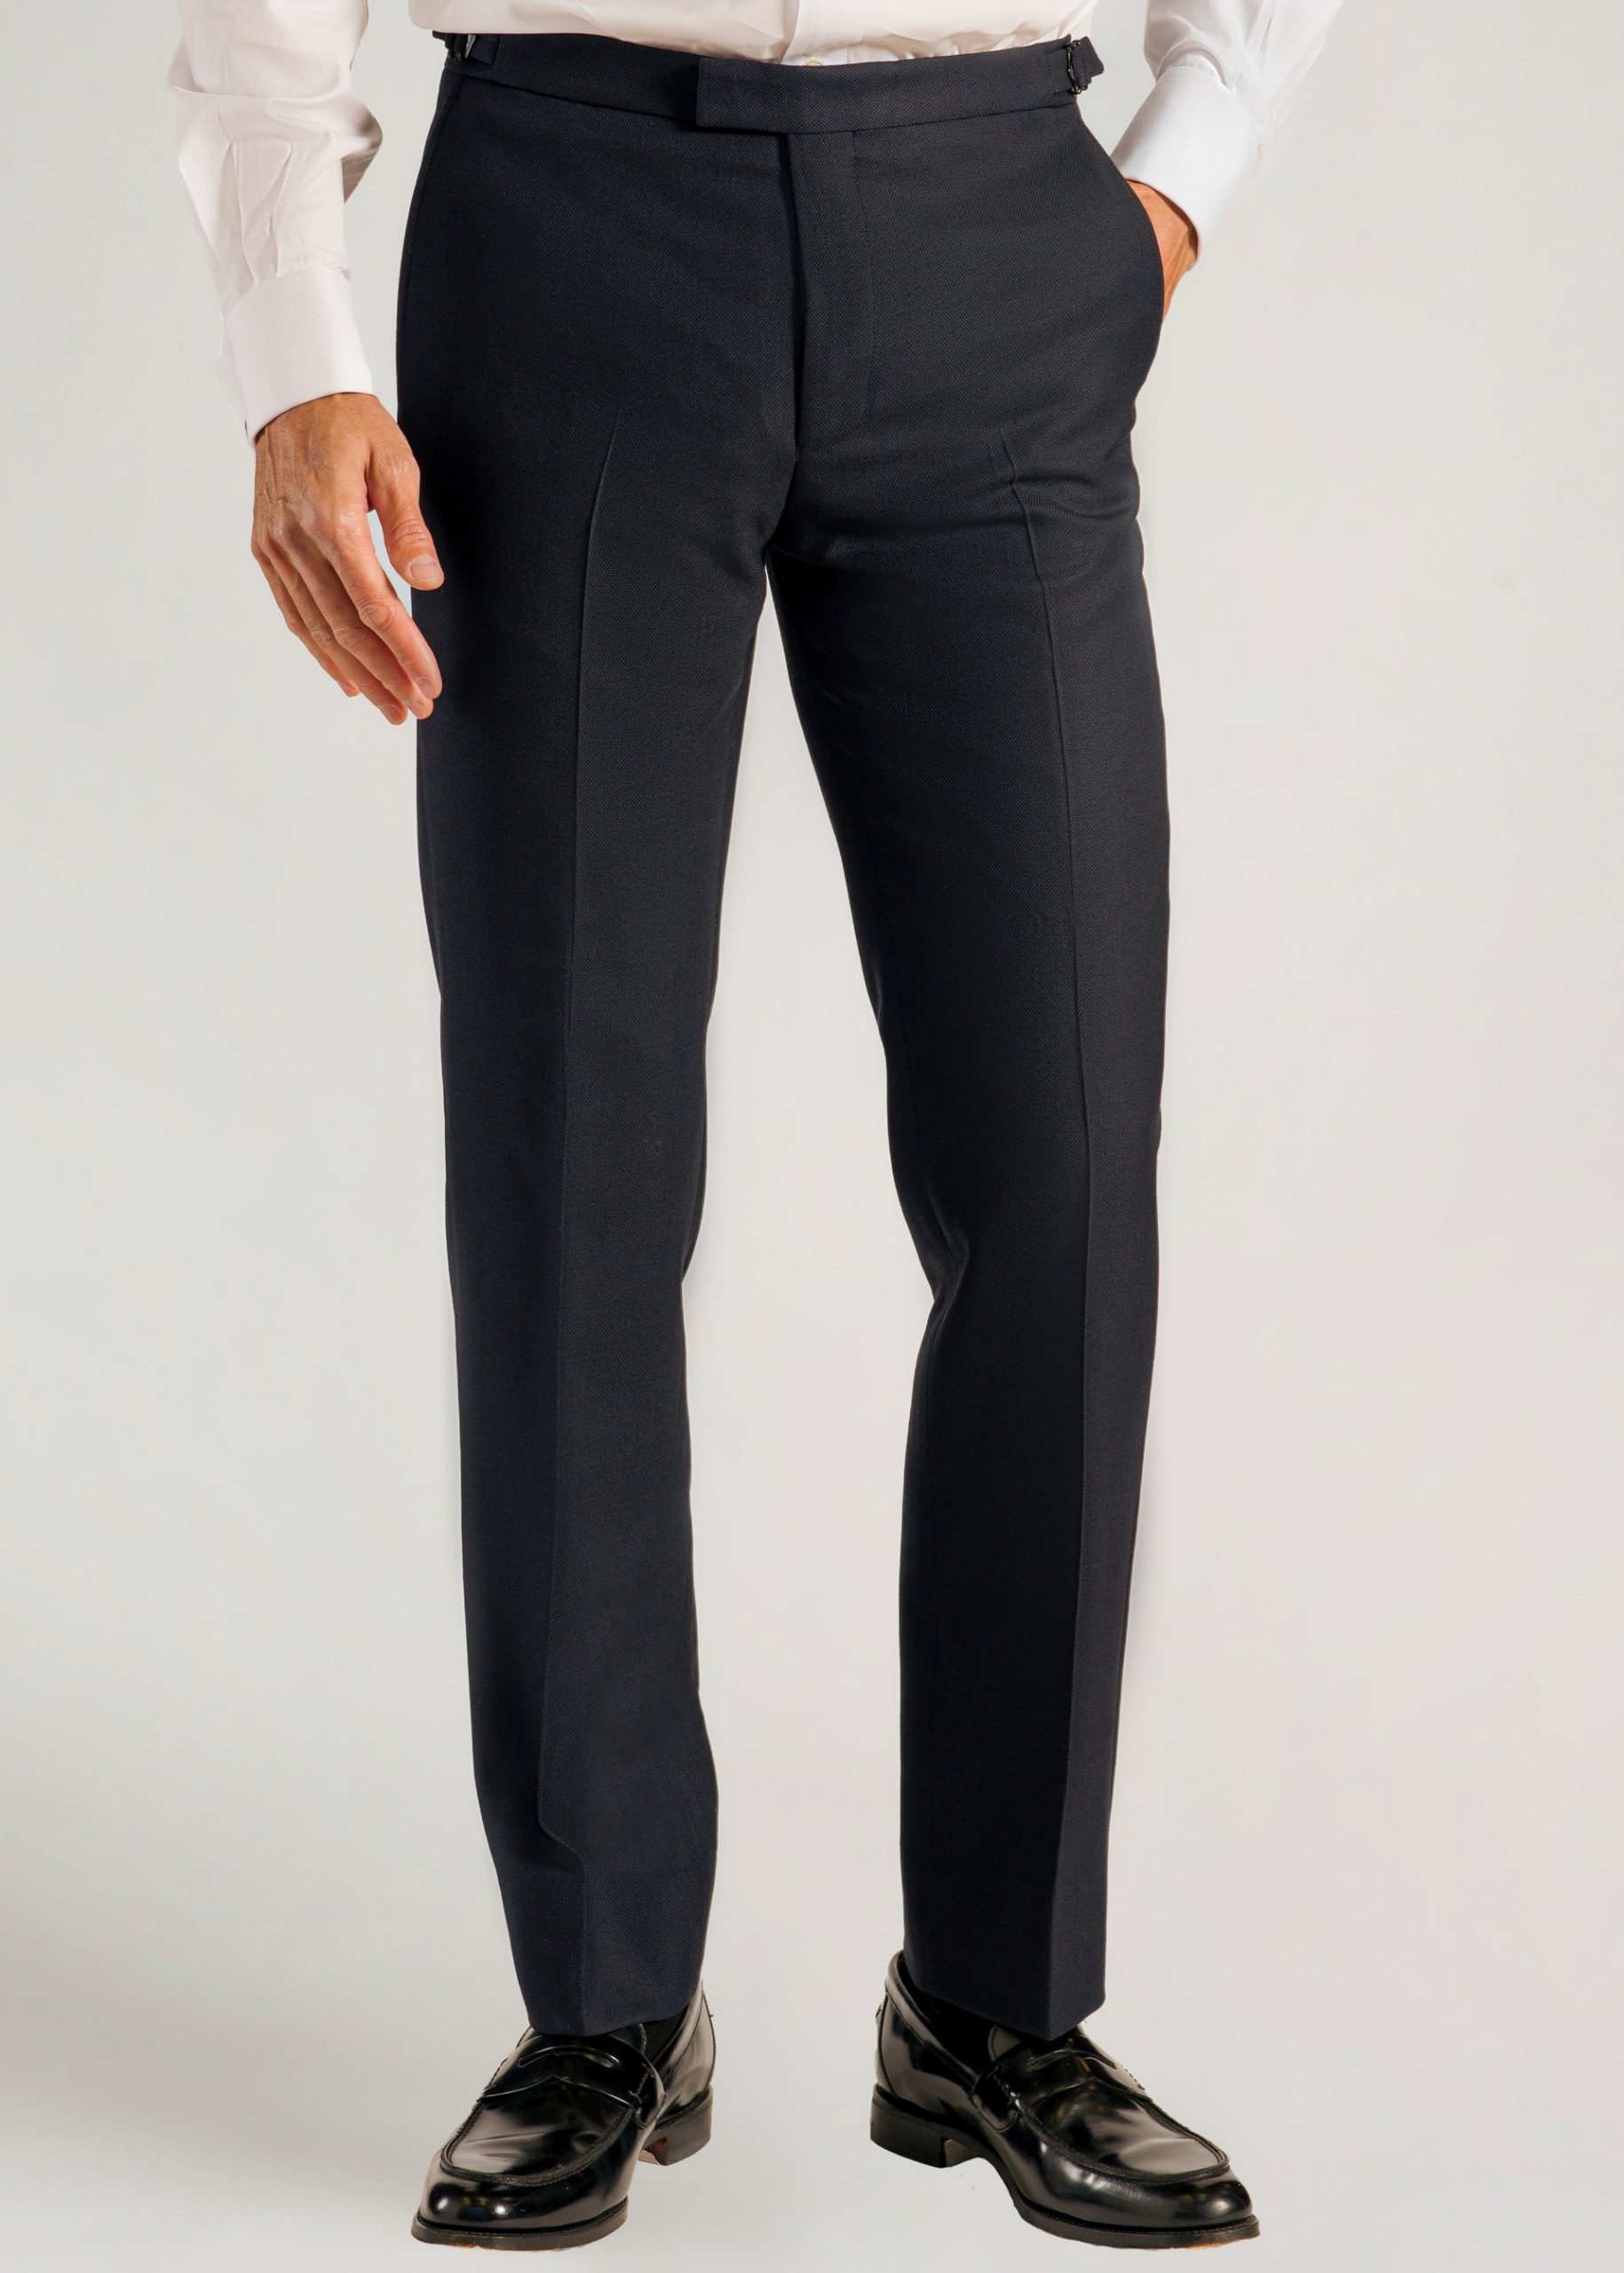 Mens suit trousers of Roderick Charles navy birdseye suit